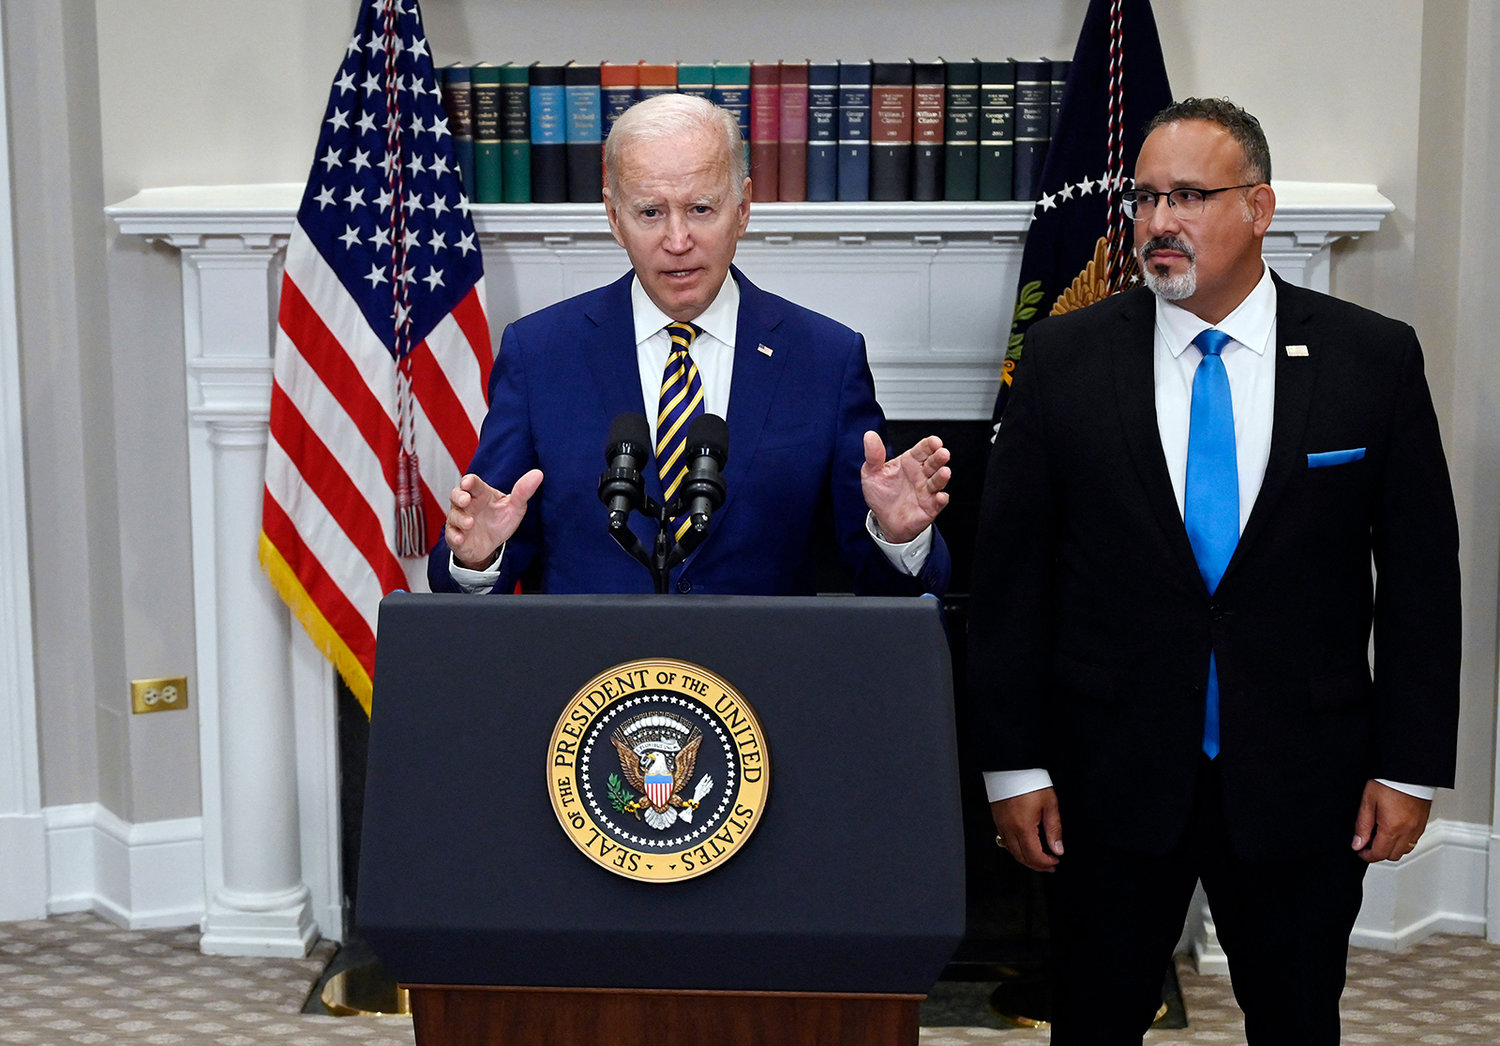 President Joe Biden announces student loan relief with Education Secretary Miguel Cardona, right, on Aug. 24, 2022, in the Roosevelt Room of the White House in Washington, D.C. (Olivier Douliery/AFP via Getty Images/TNS)